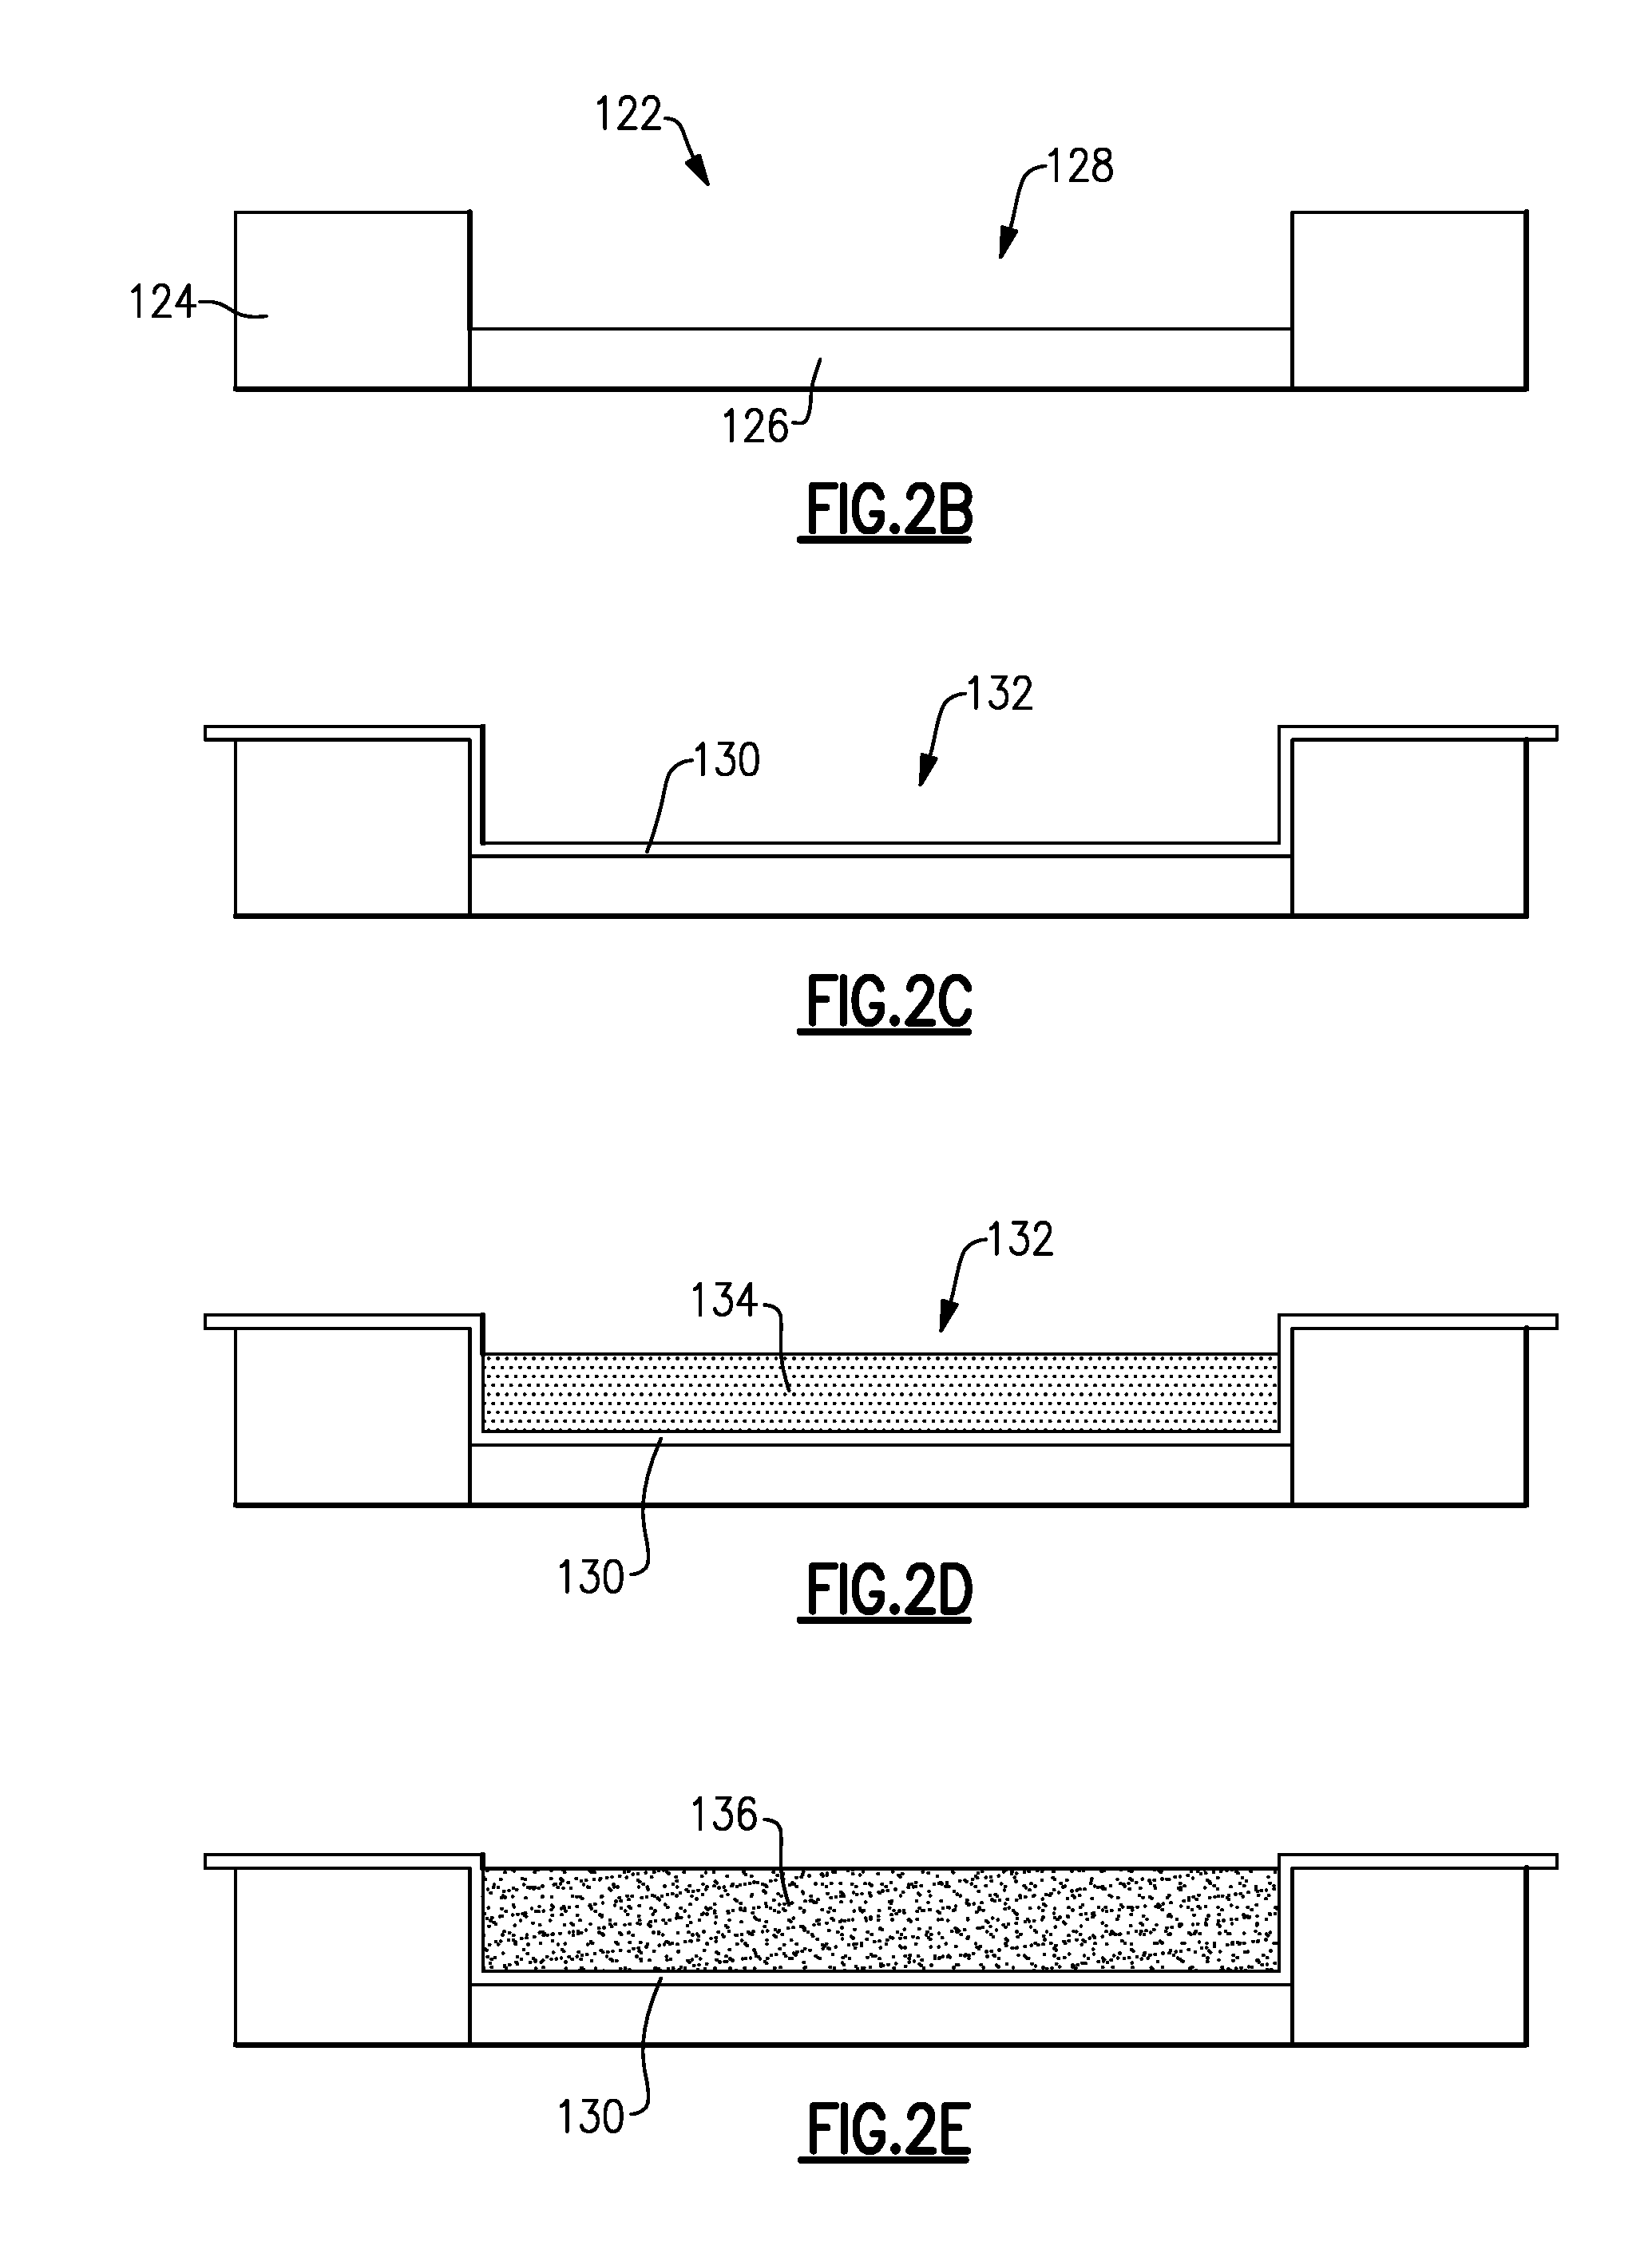 Shielded module having compression overmold